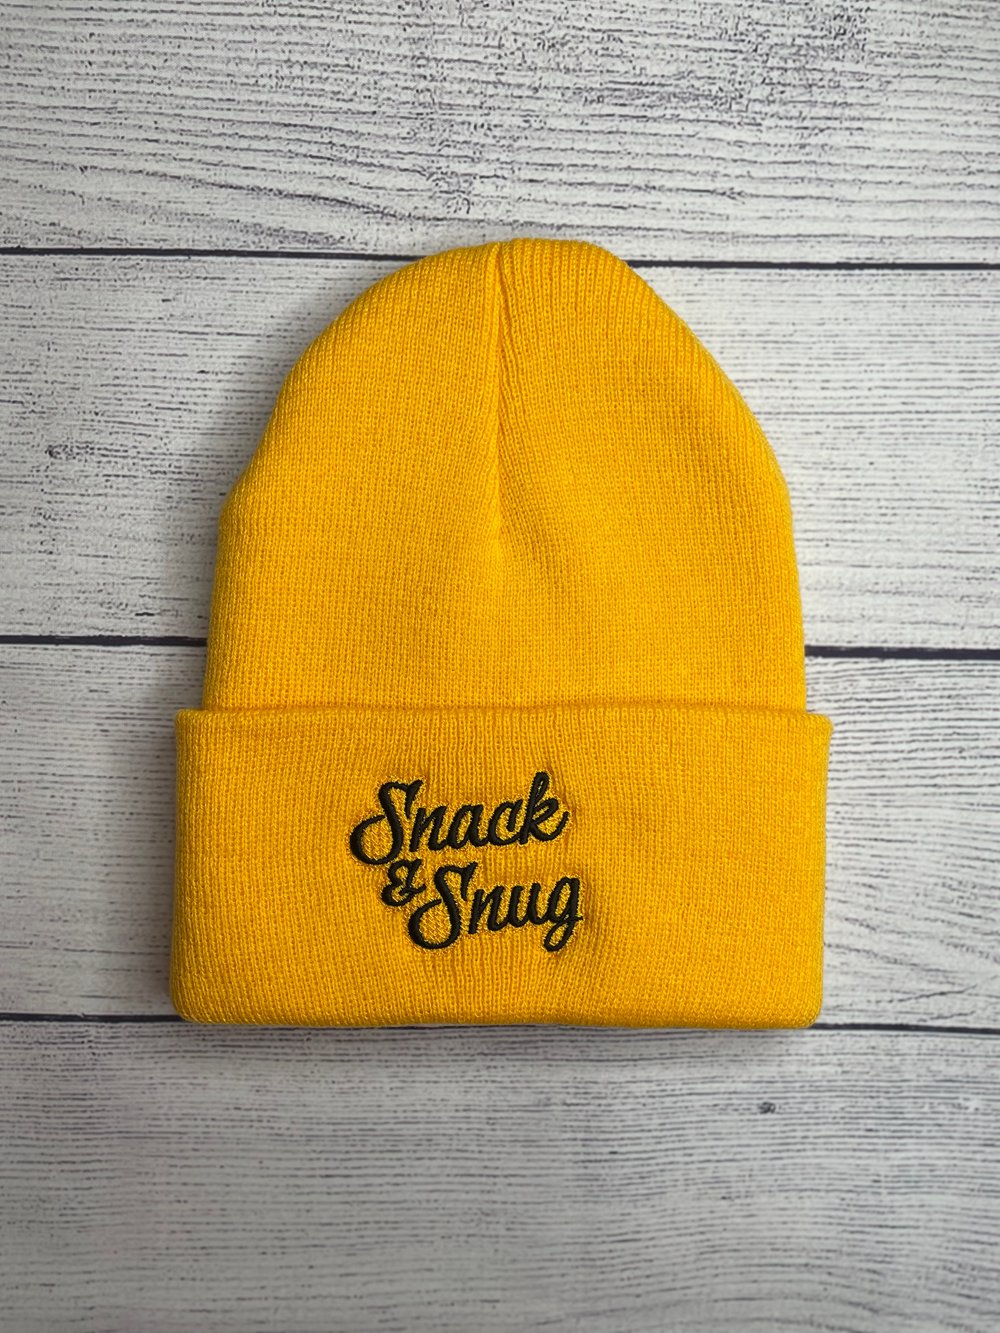 New!!  Snack and Snug beanies multiple colors